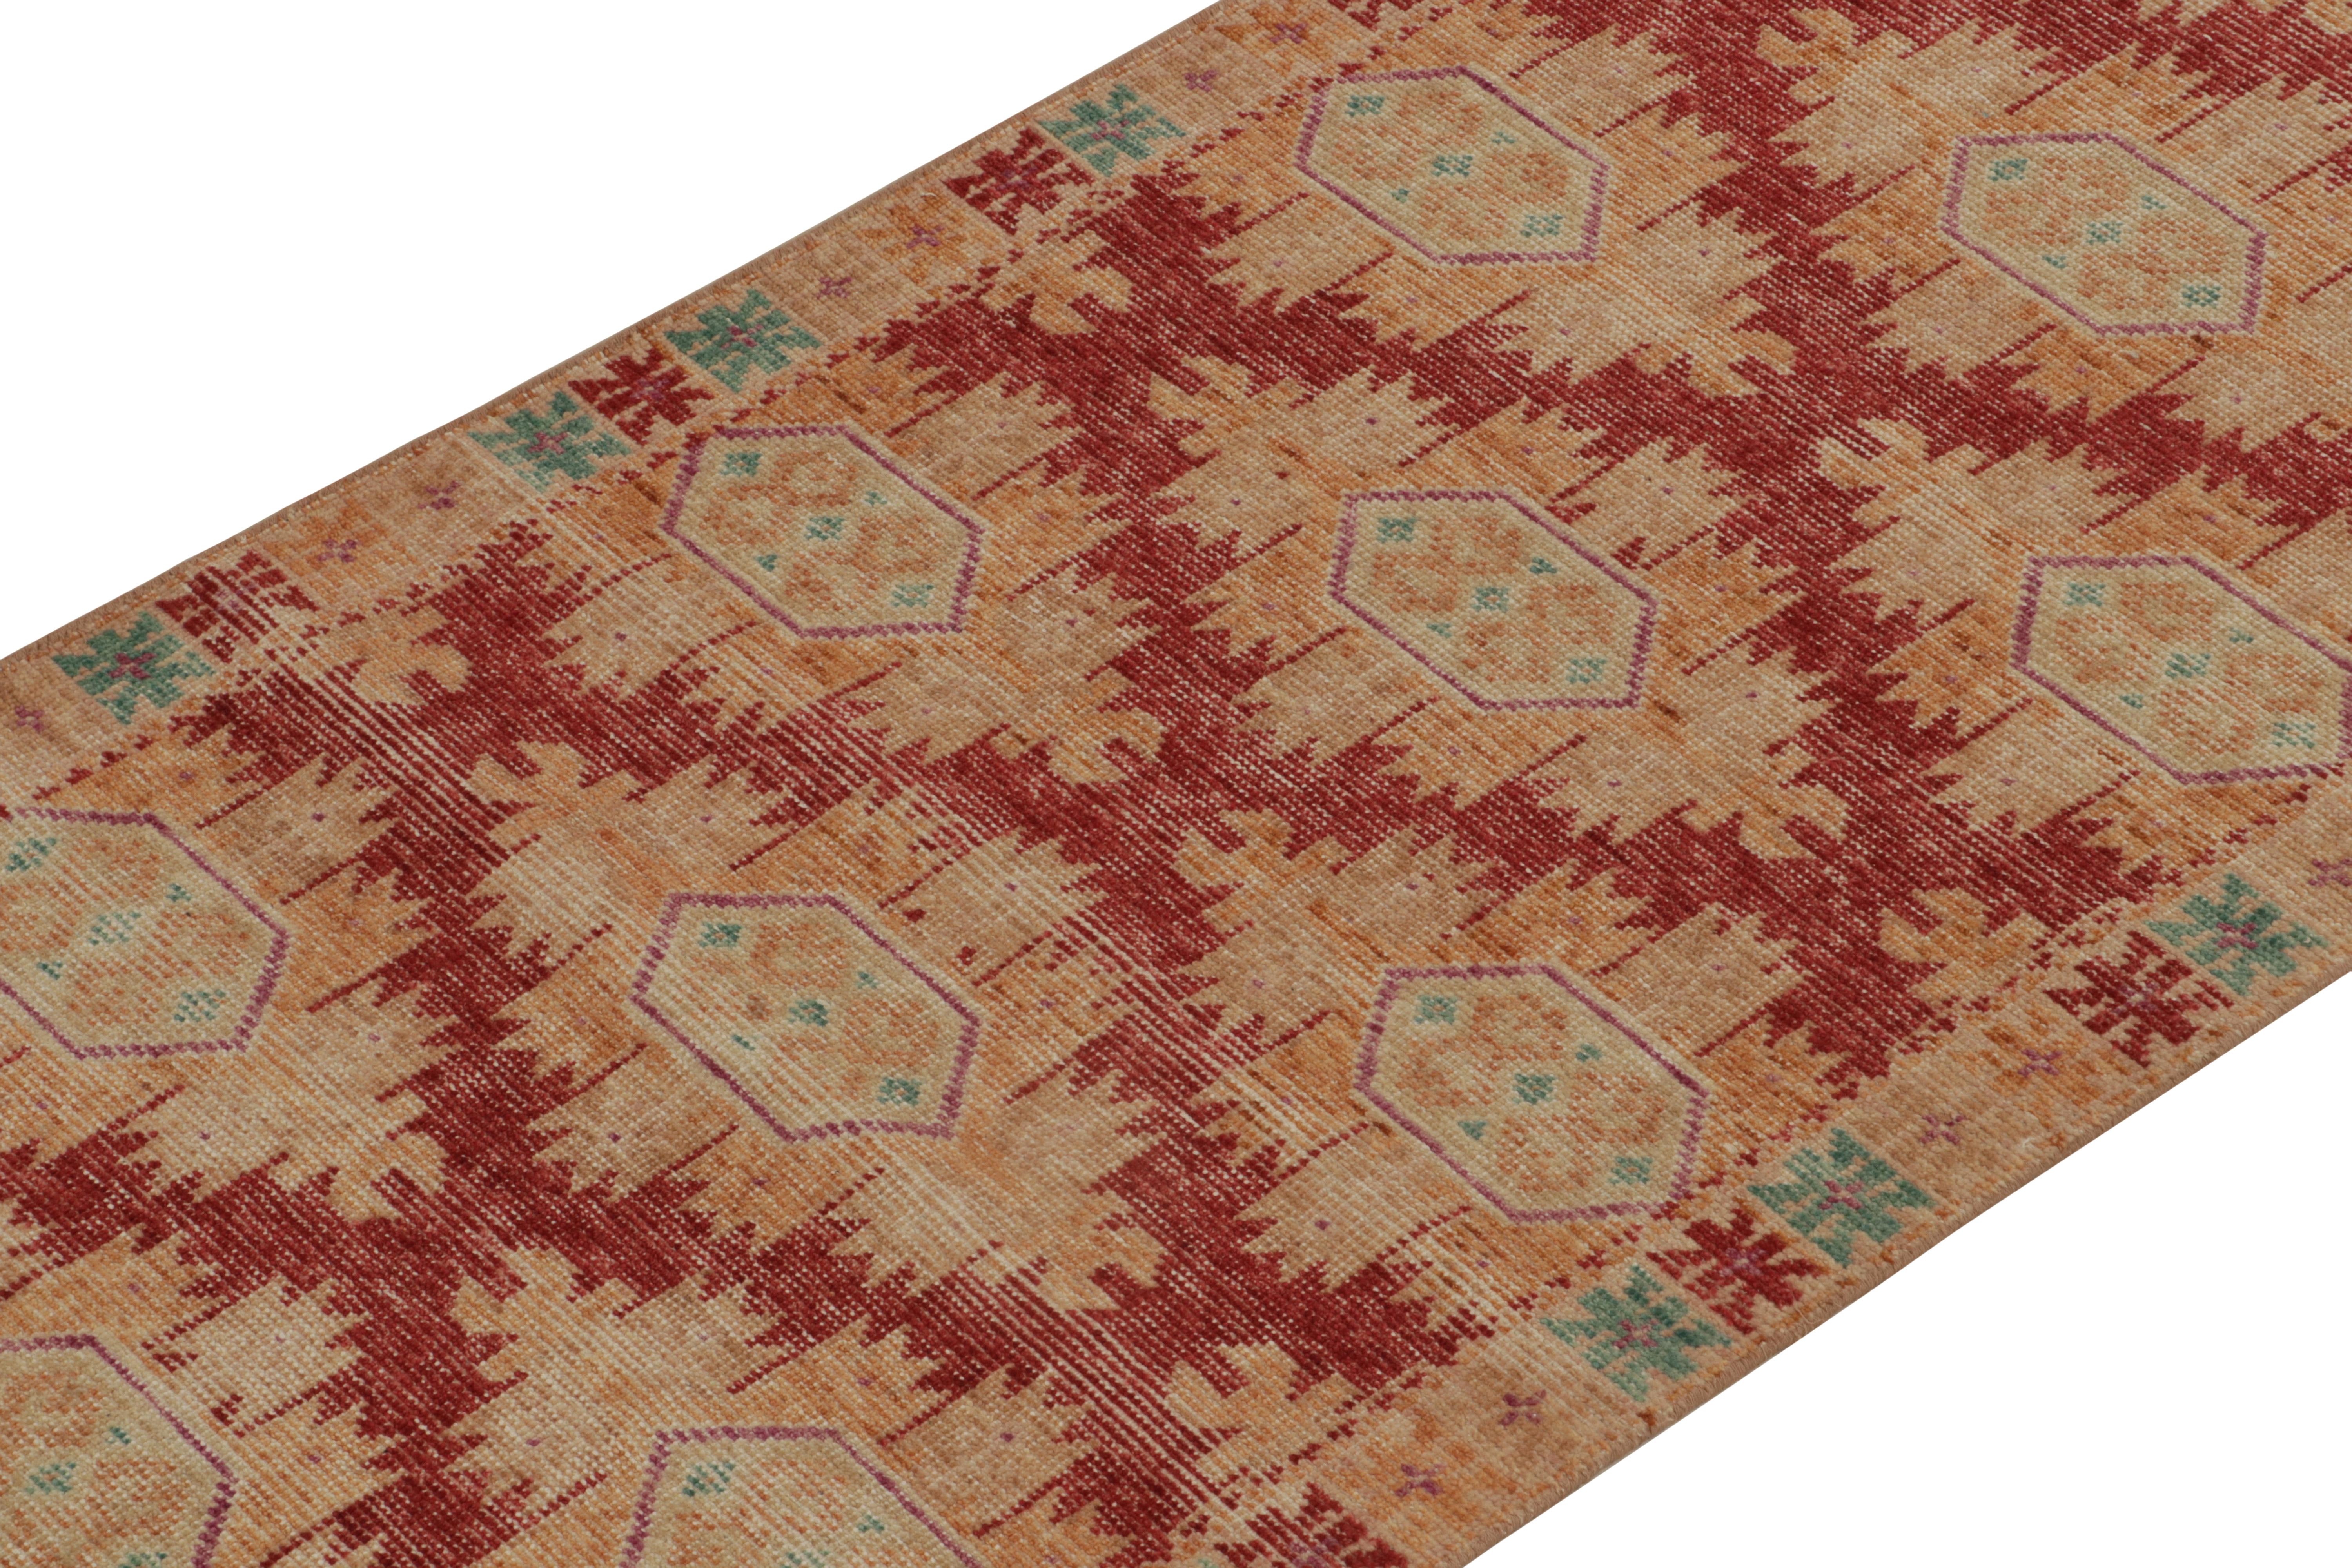 Indian Rug & Kilim’s Distressed Bokhara Style Runner in Red, Beige & Gold Medallions For Sale